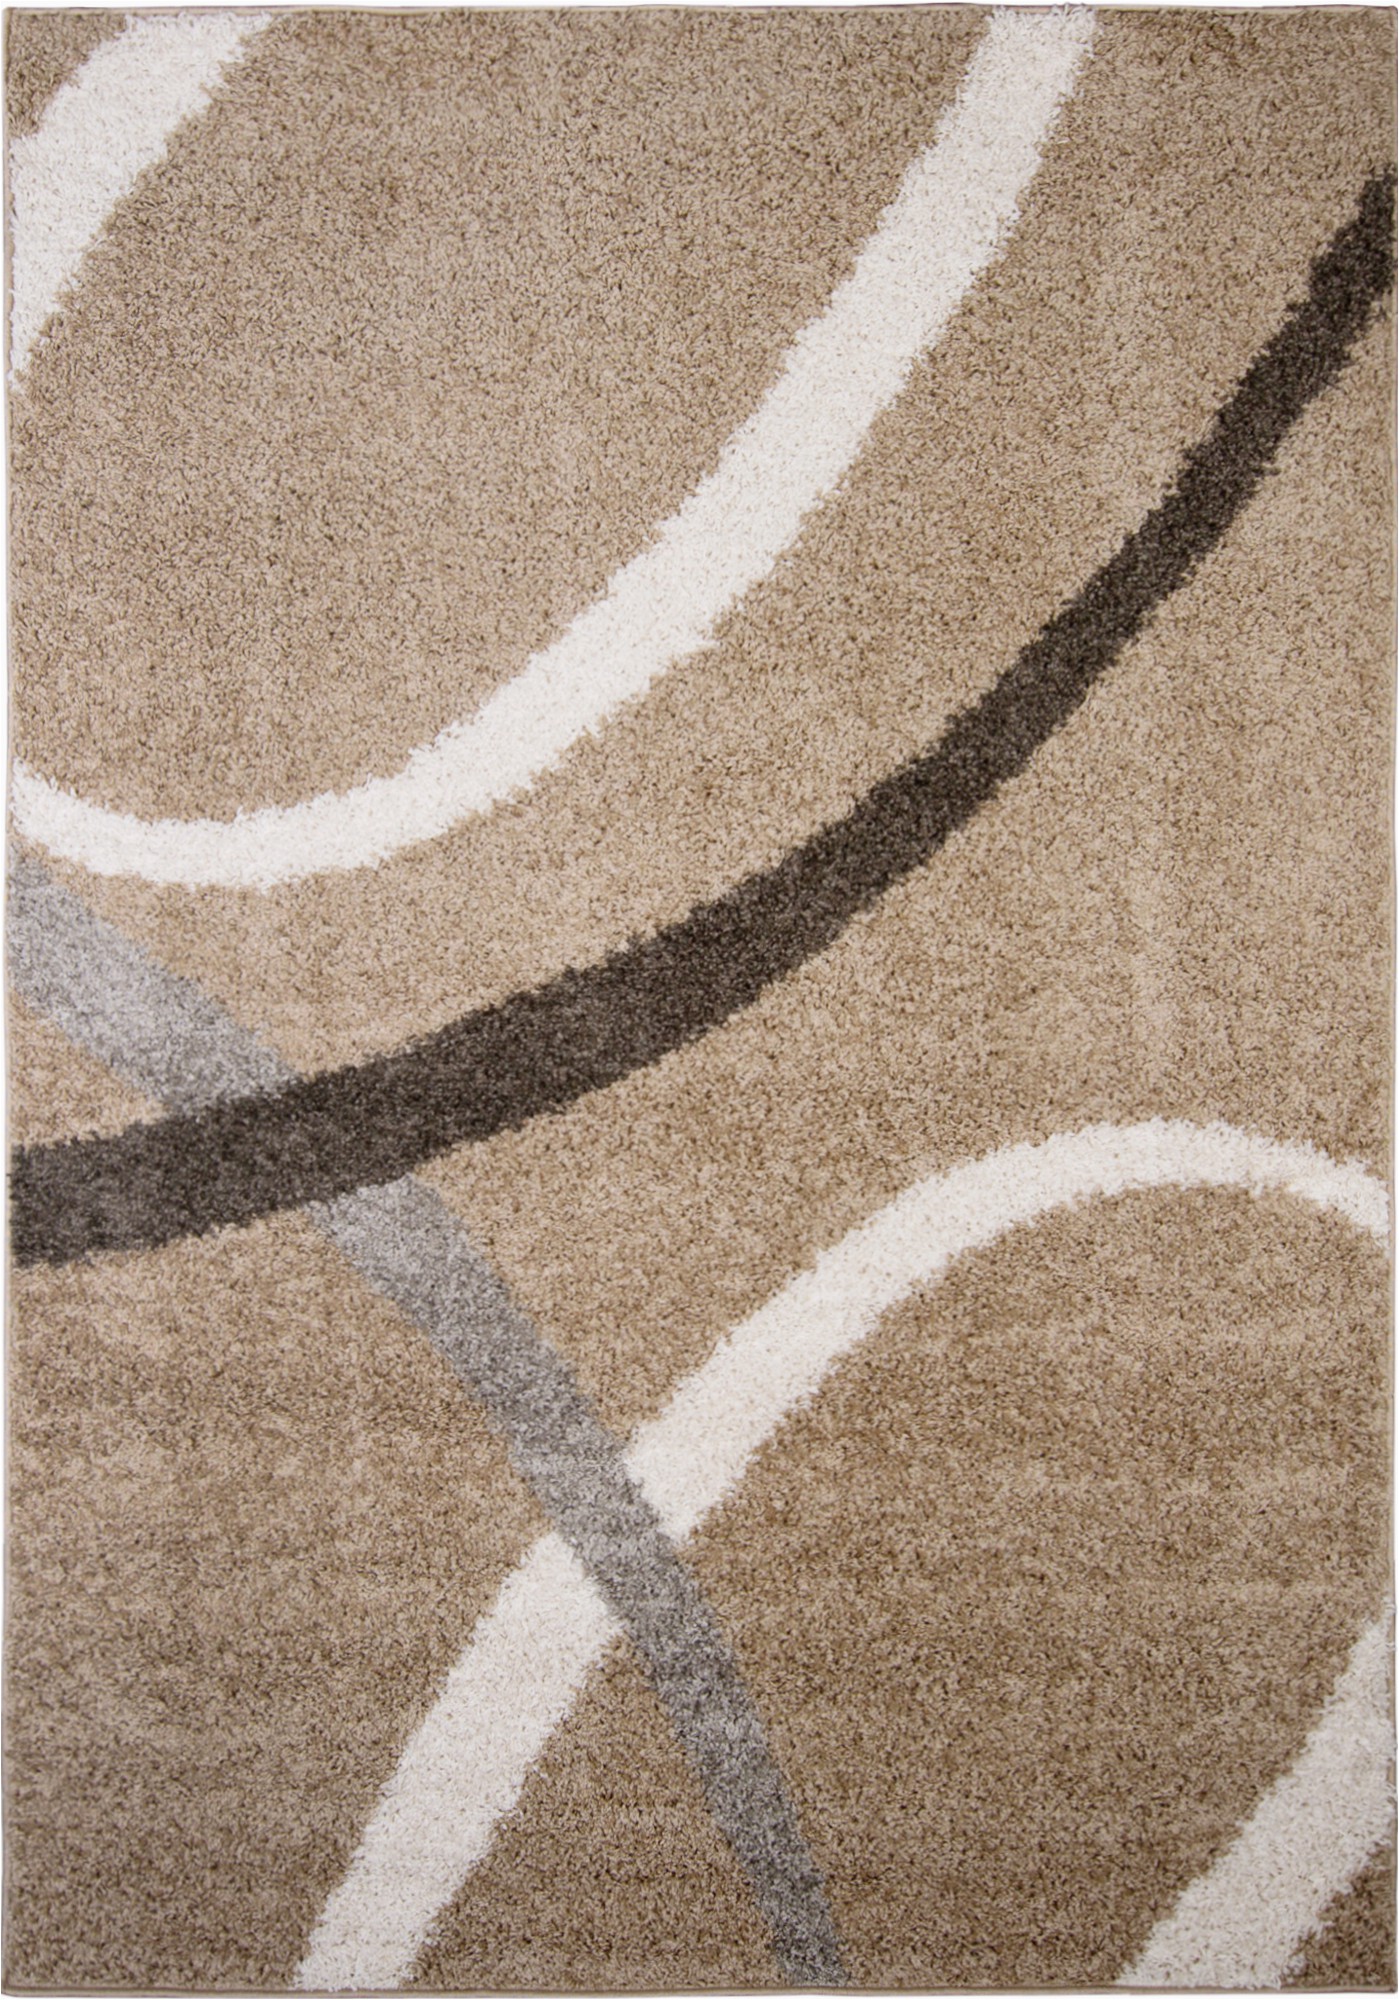 Nicole Miller Synergy area Rug Details About Nicole Miller Designer area Rug Beige White Geometric Swirls Carpet Shag Rug